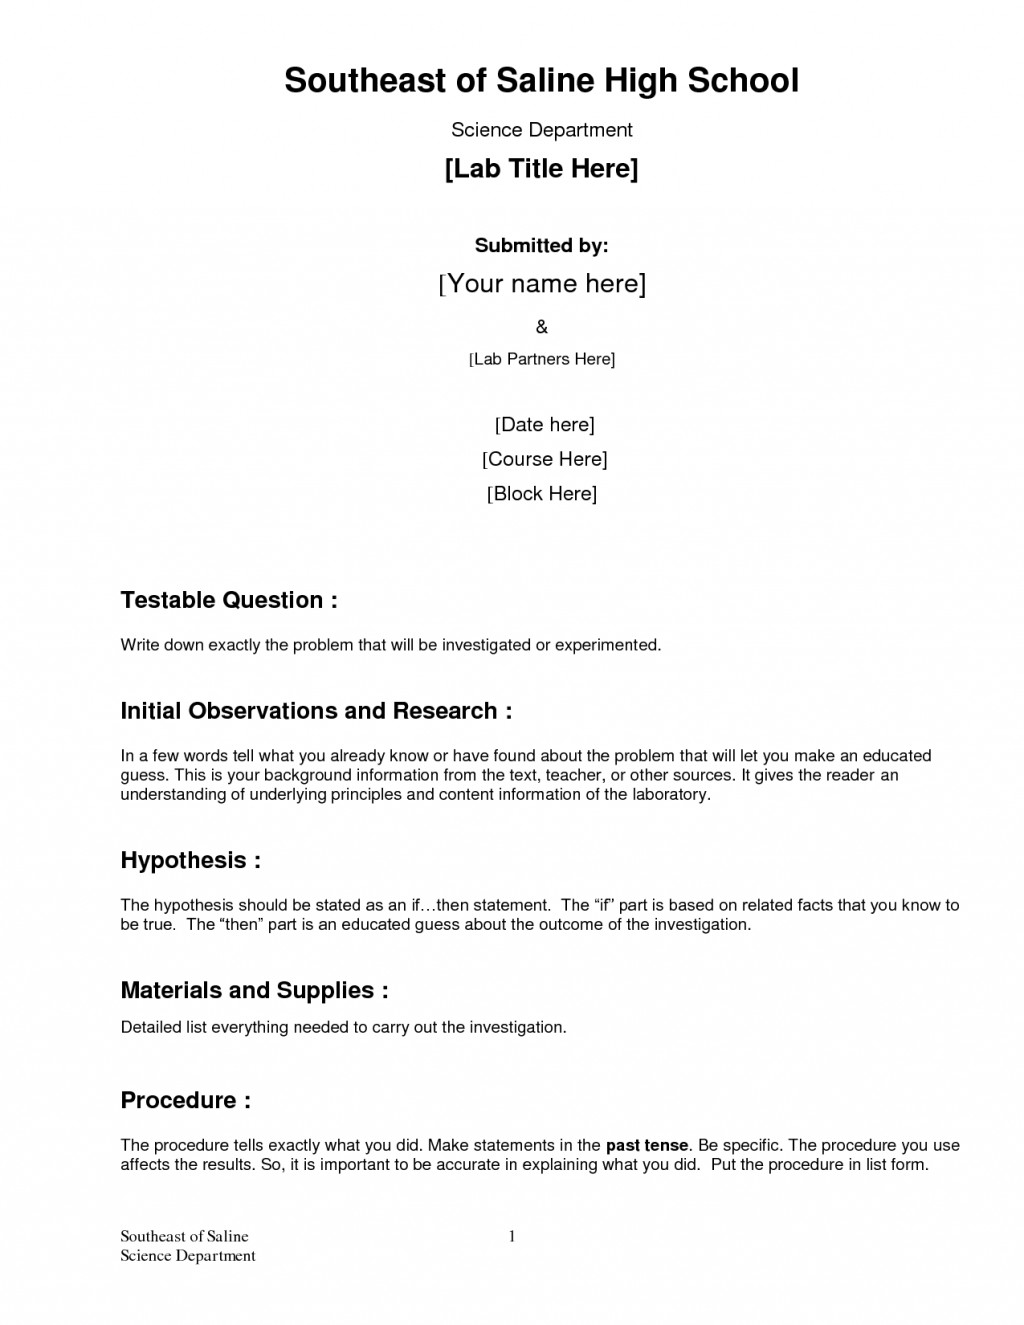 Formal Lab Report Template formal Lab Report Template Biological Science Picture